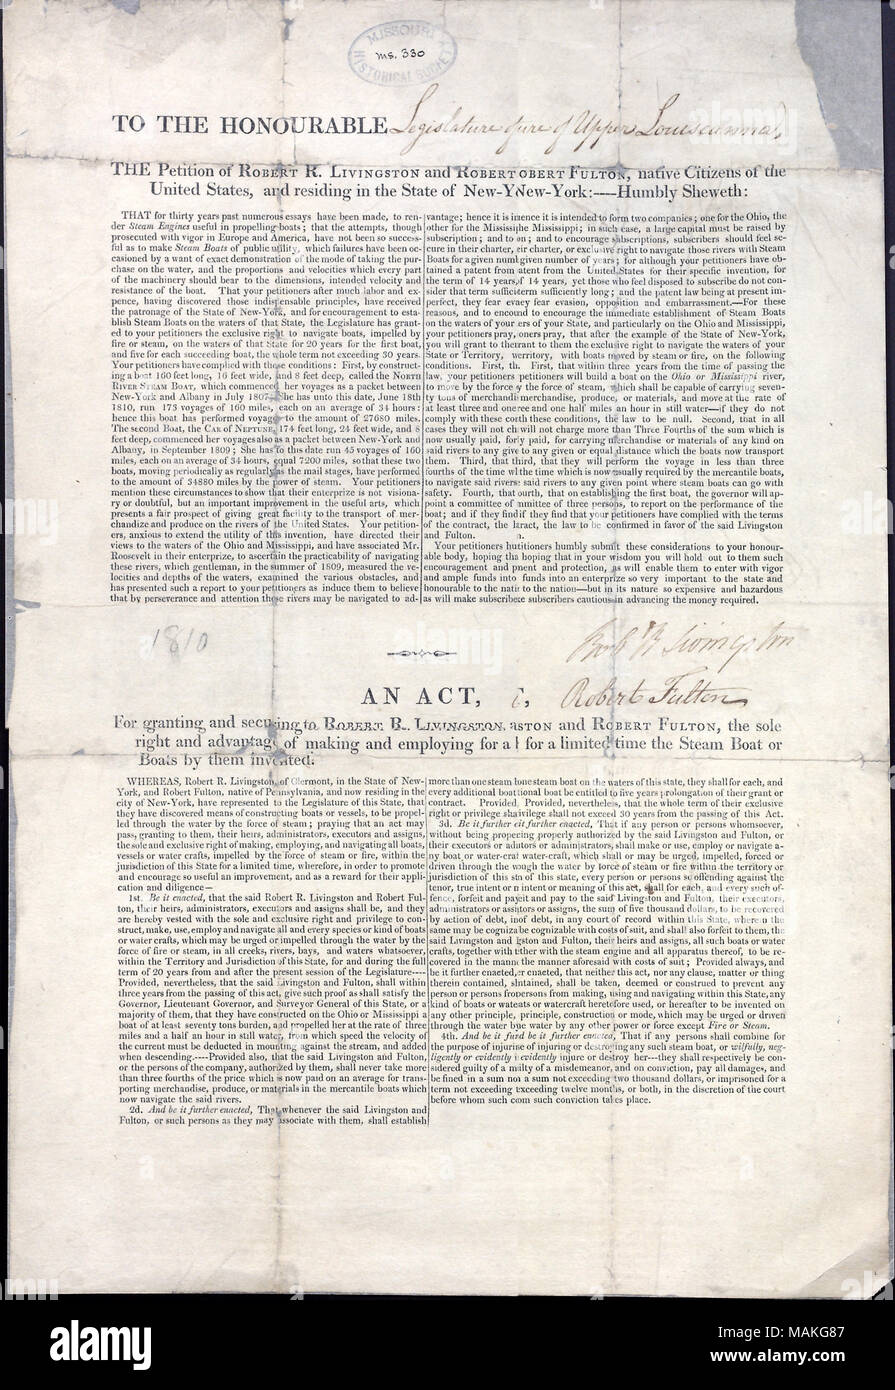 Includes the printed Act of the Legislature 'granting and securing to Robert R. Livingston and Robert Fulton, the sole right and advantage of making and employing for a limited time the steamboat or boats by them invented.' Title: Printed petition of Robert R. Livingston and Robert Fulton to the Upper Louisiana Legislature for the exclusive right to navigate the waters of Upper Louisiana, October 1810  . October 1810. Livingston, Robert R. Stock Photo